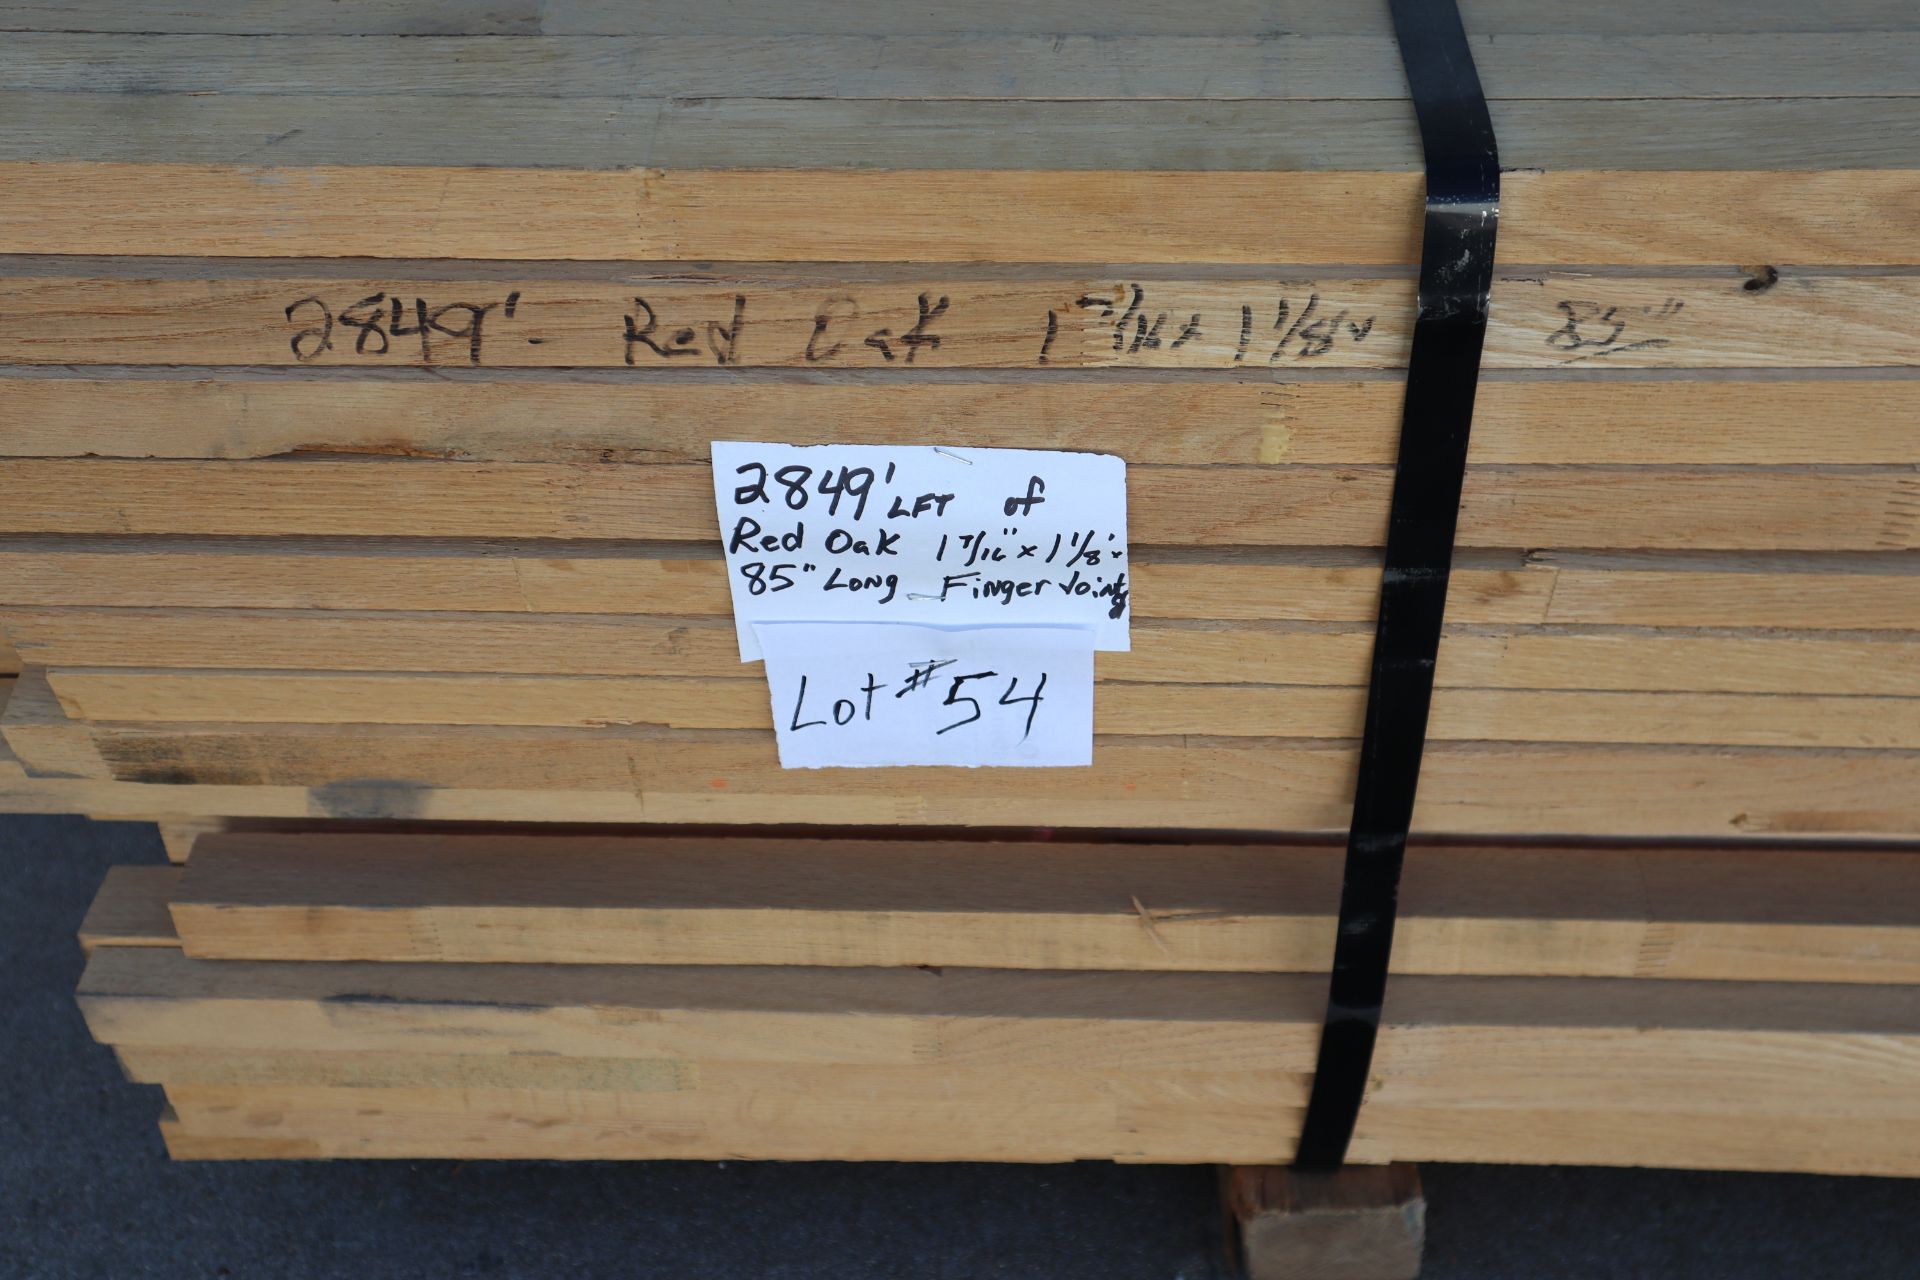 2,849' LFT Of Red Oak 1-7/16"x1-1/8"x85" long Finger Joint - Image 3 of 4